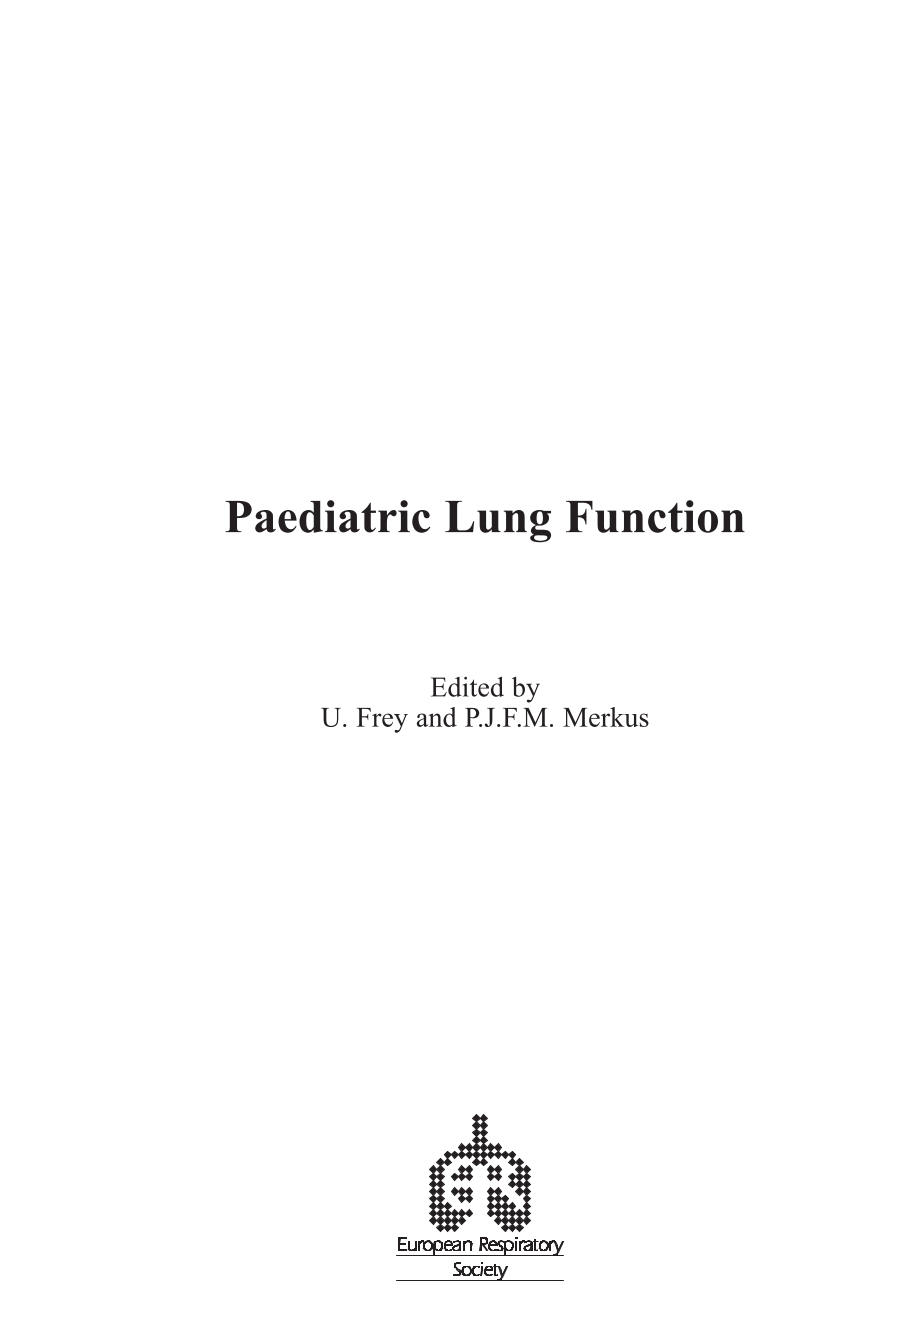 Paediatric Lung Function page iv